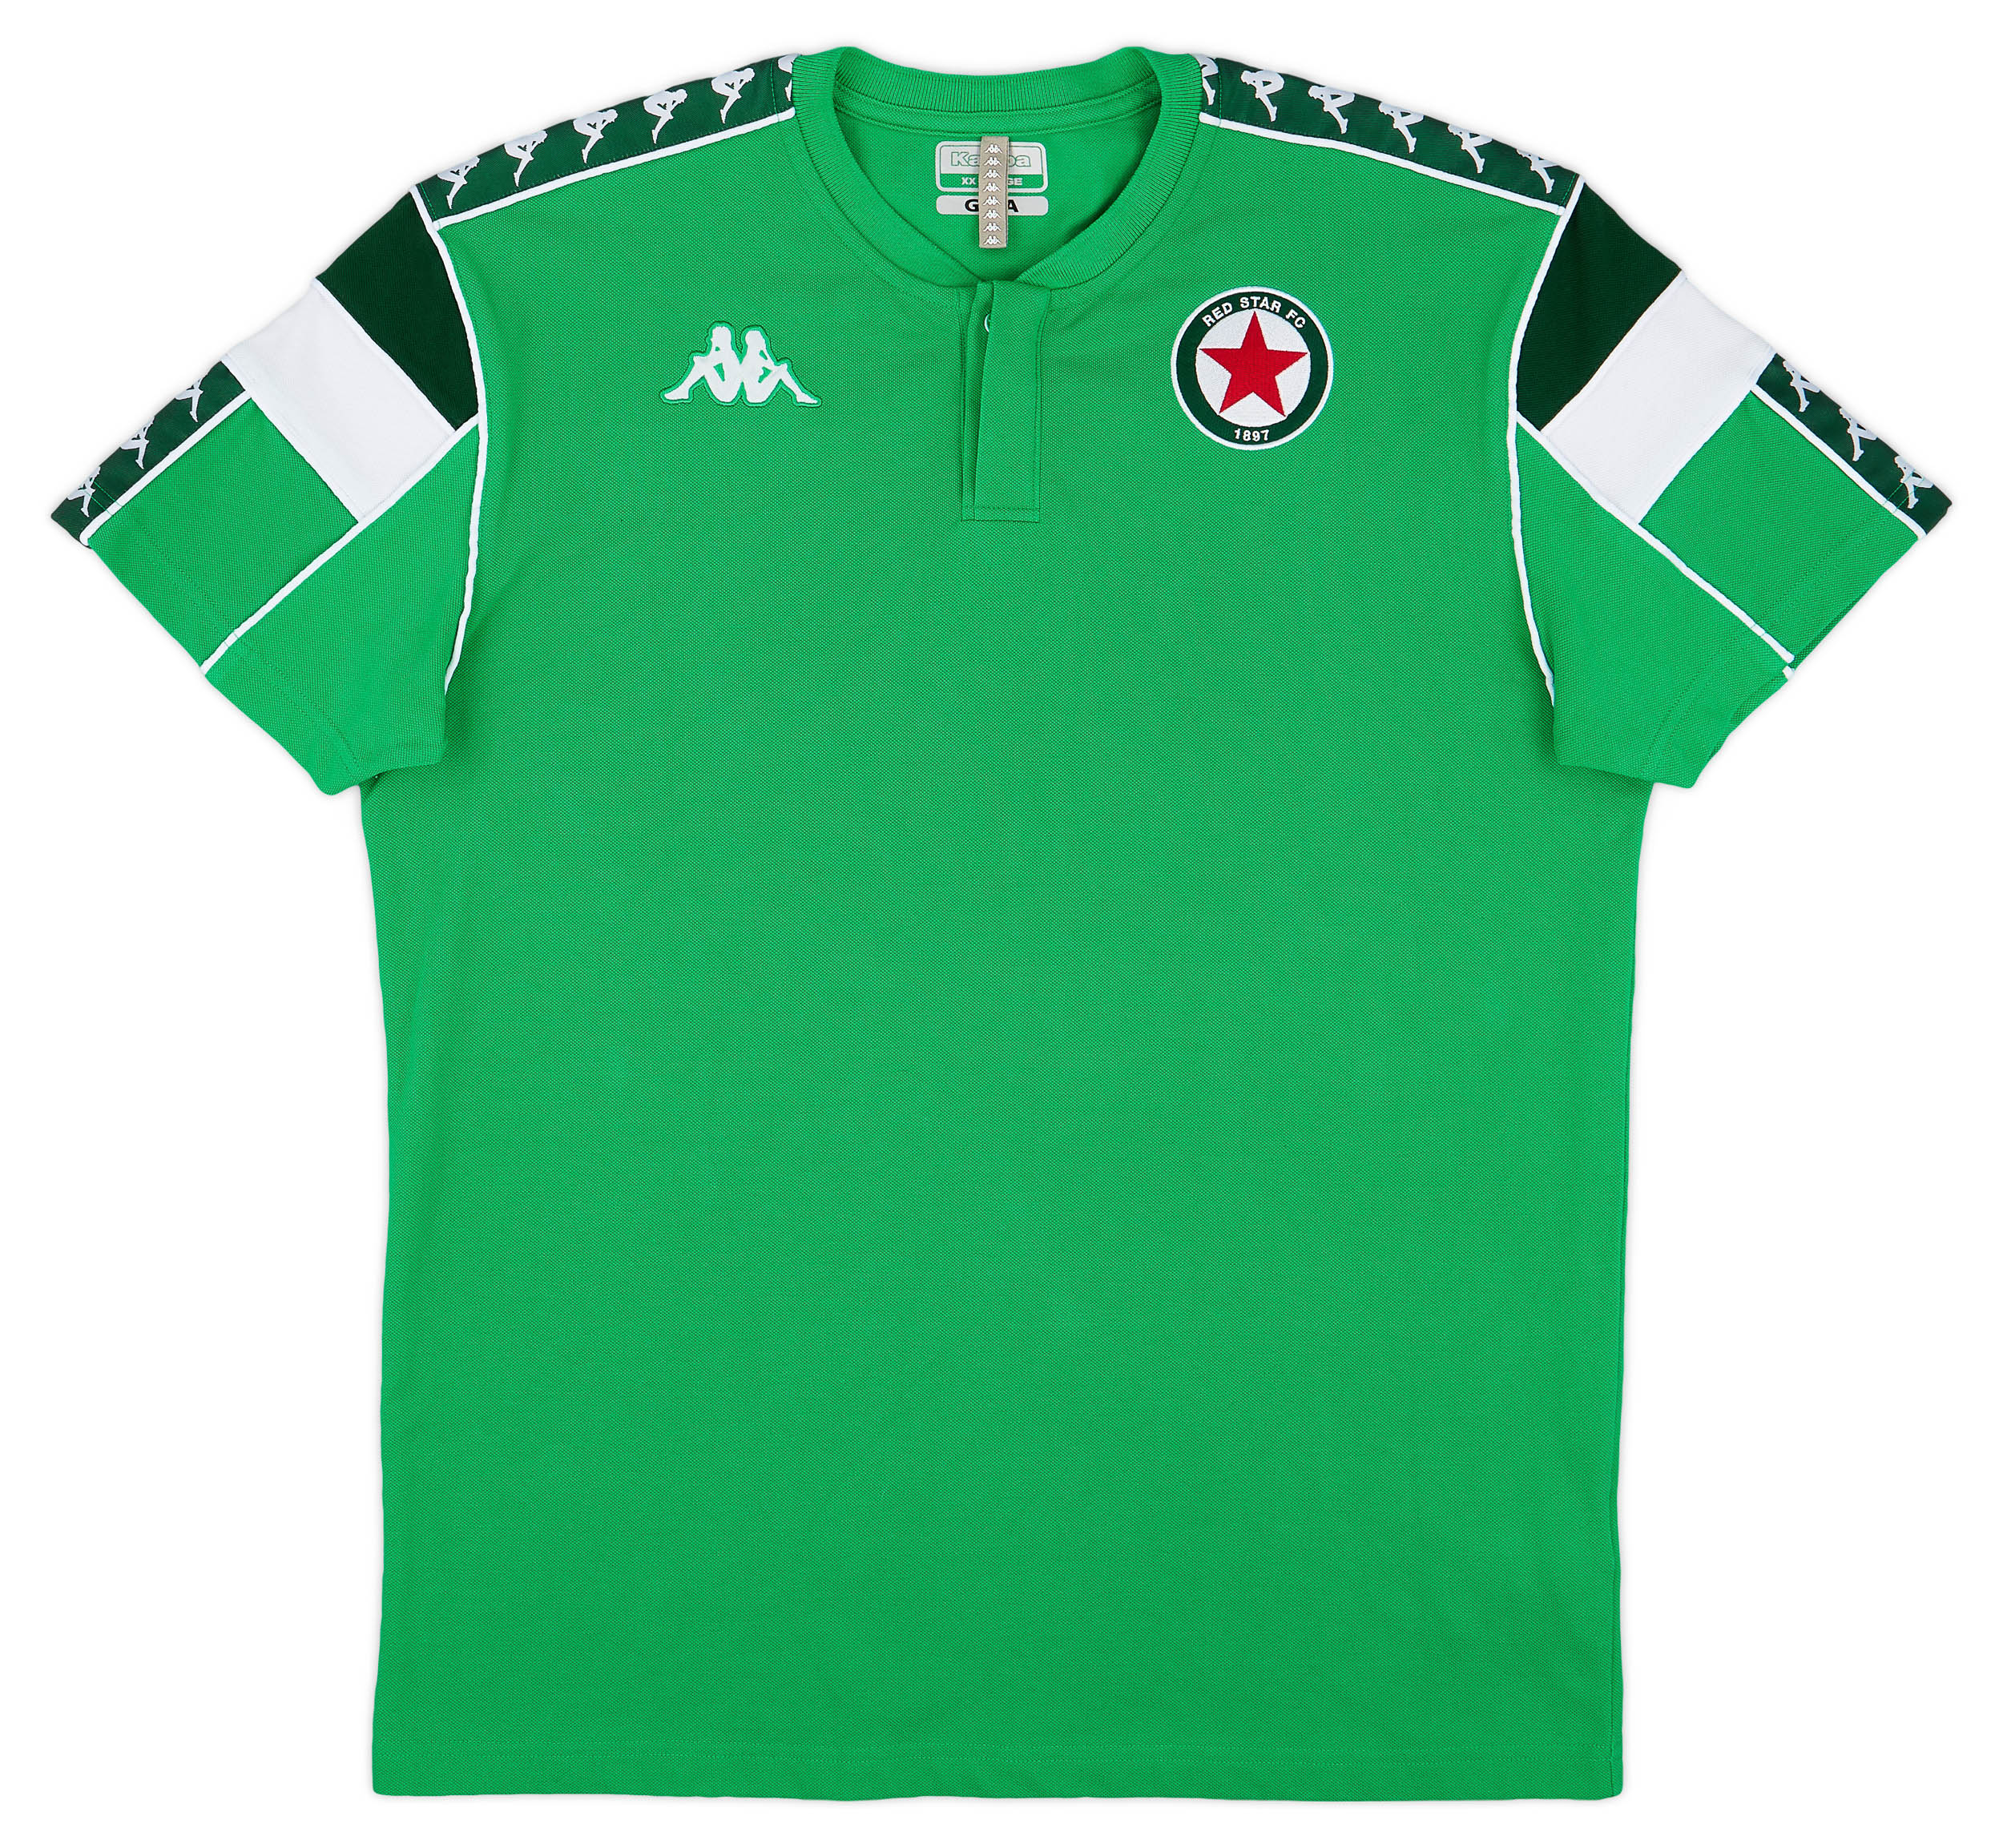 2021-22 Red Star FC Kappa Polo T-Shirt - Excellent 9/10 - (XXL)